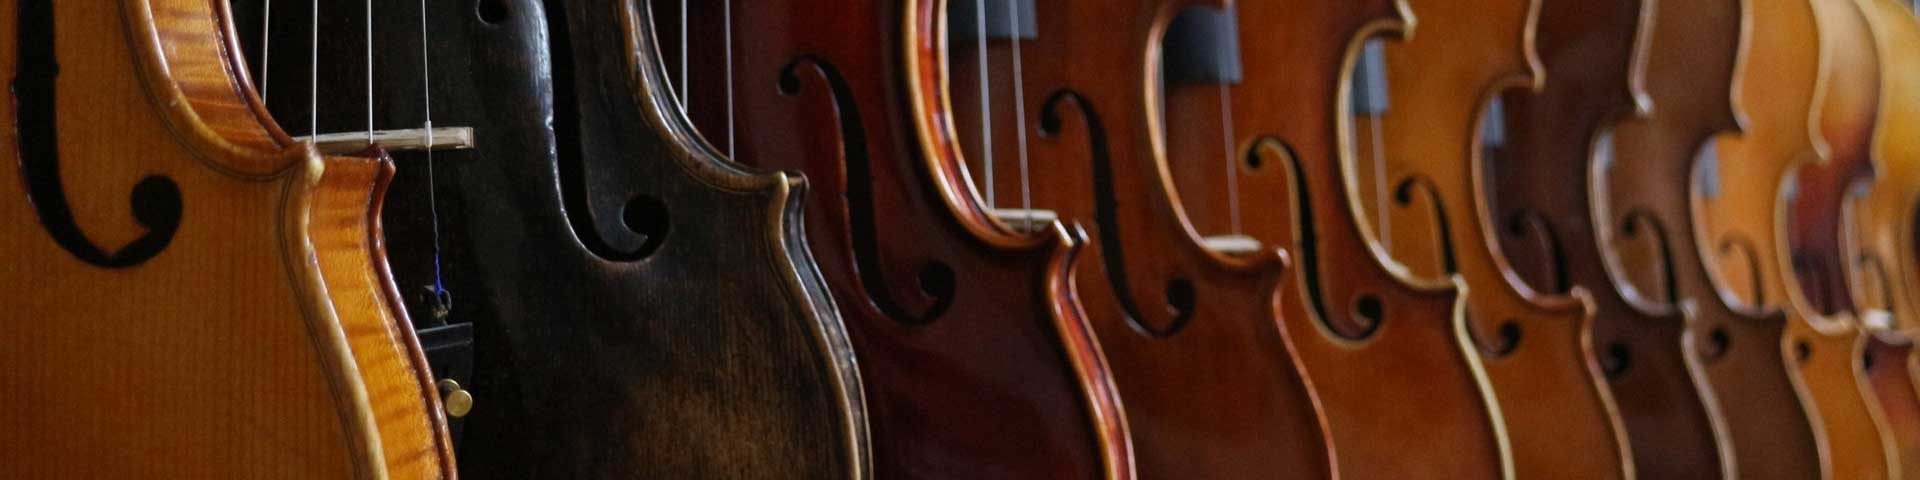 Header image of a series of cellos